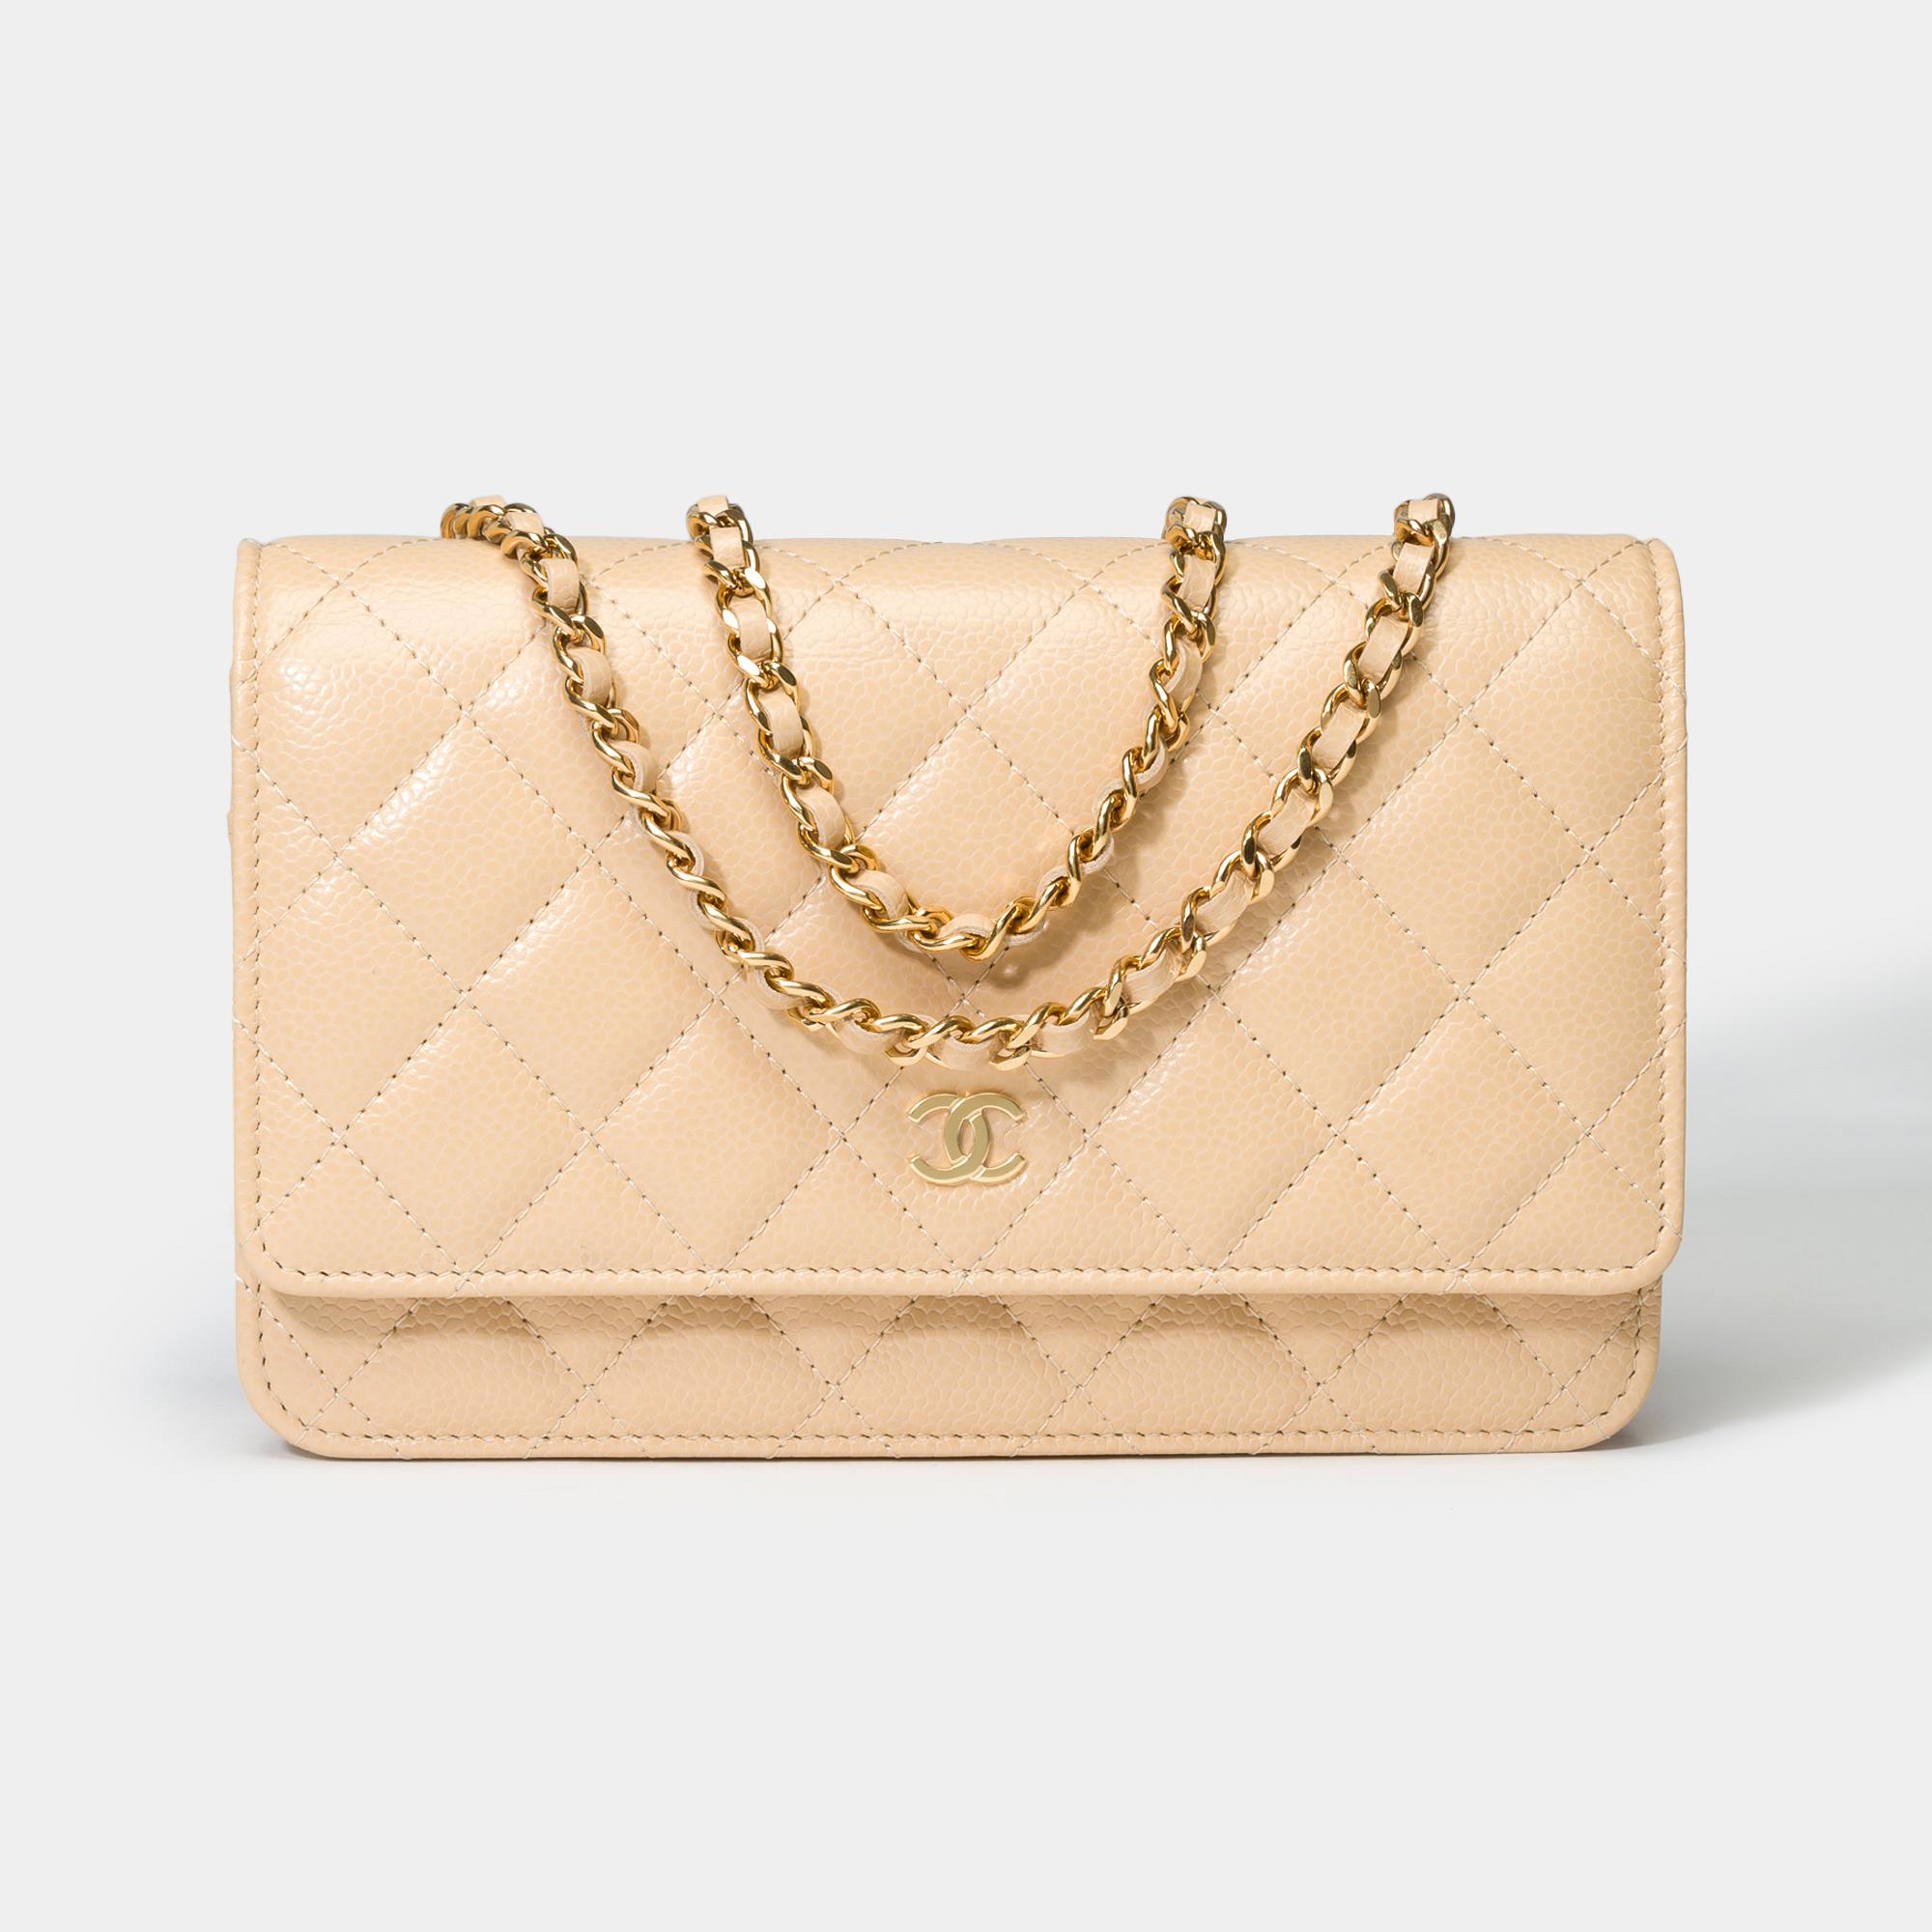 Superb​ ​Chanel​ ​Wallet​ ​On​ ​Chain​ ​(WOC)​ ​bag​ ​in​ ​beige​ ​quilted​ ​caviar​ ​leather,​ ​gold​ ​metal​ ​trim,​ ​a​ ​gold​ ​metal​ ​chain​ ​handle​ ​interlaced​ ​with​ ​beige​ ​leather​ ​for​ ​shoulder​ ​or​ ​crossbody​ ​carry


Closure​ ​by​